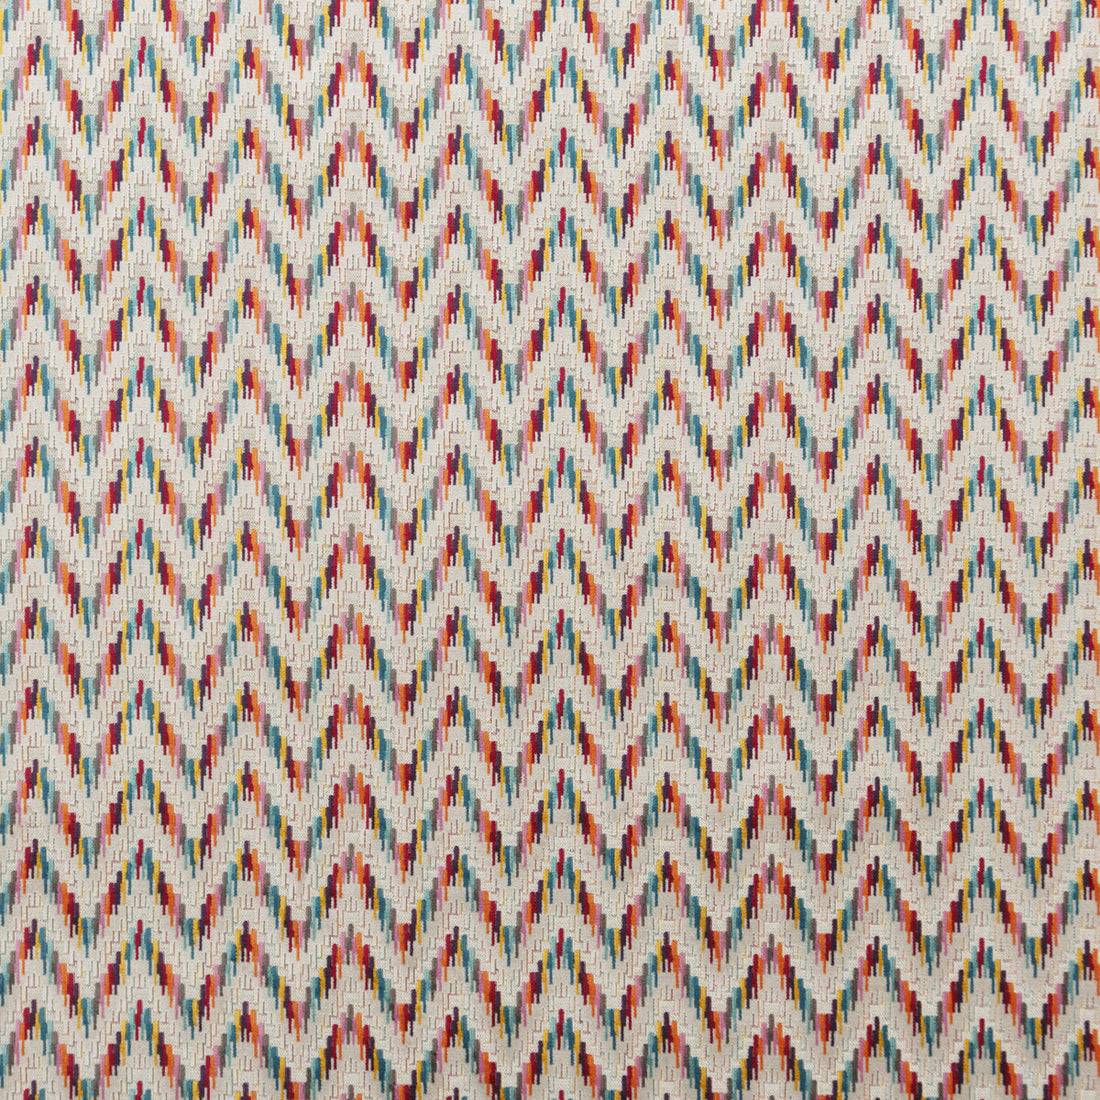 Carnival Chevron fabric in tutti frutti color - pattern PF50426.1.0 - by Baker Lifestyle in the Carnival collection